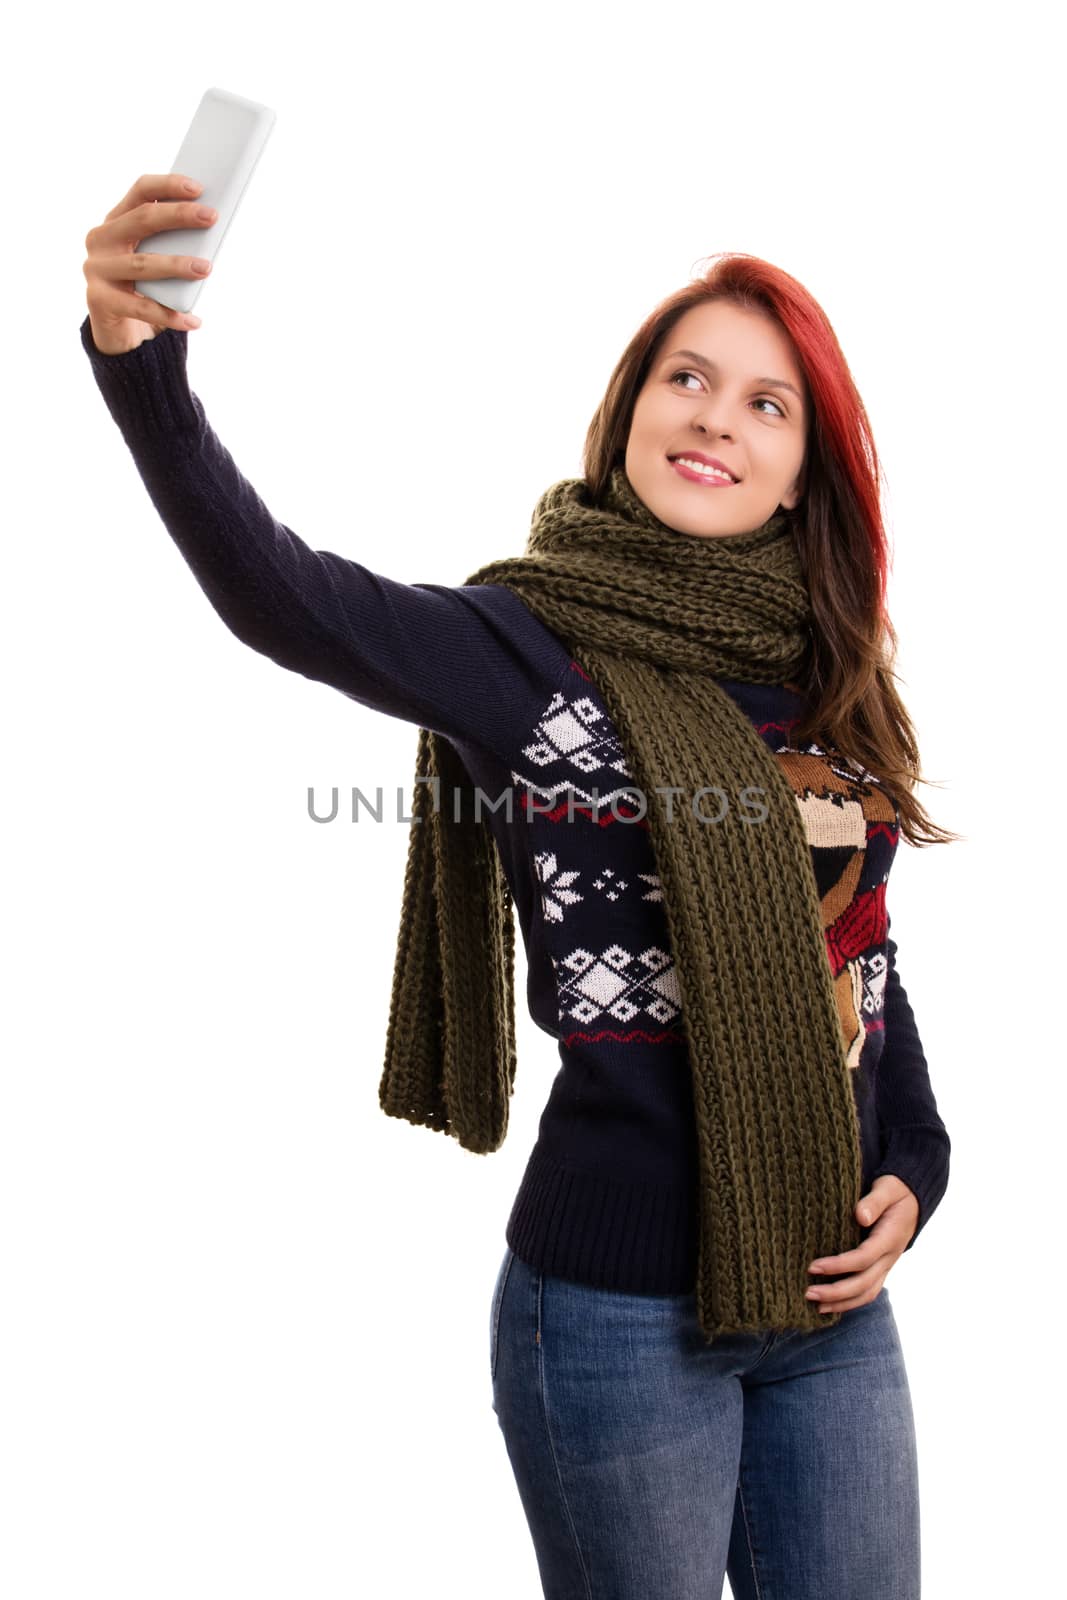 A portrait of a beautiful young girl in winter clothes taking a selfie, isolated on white background.